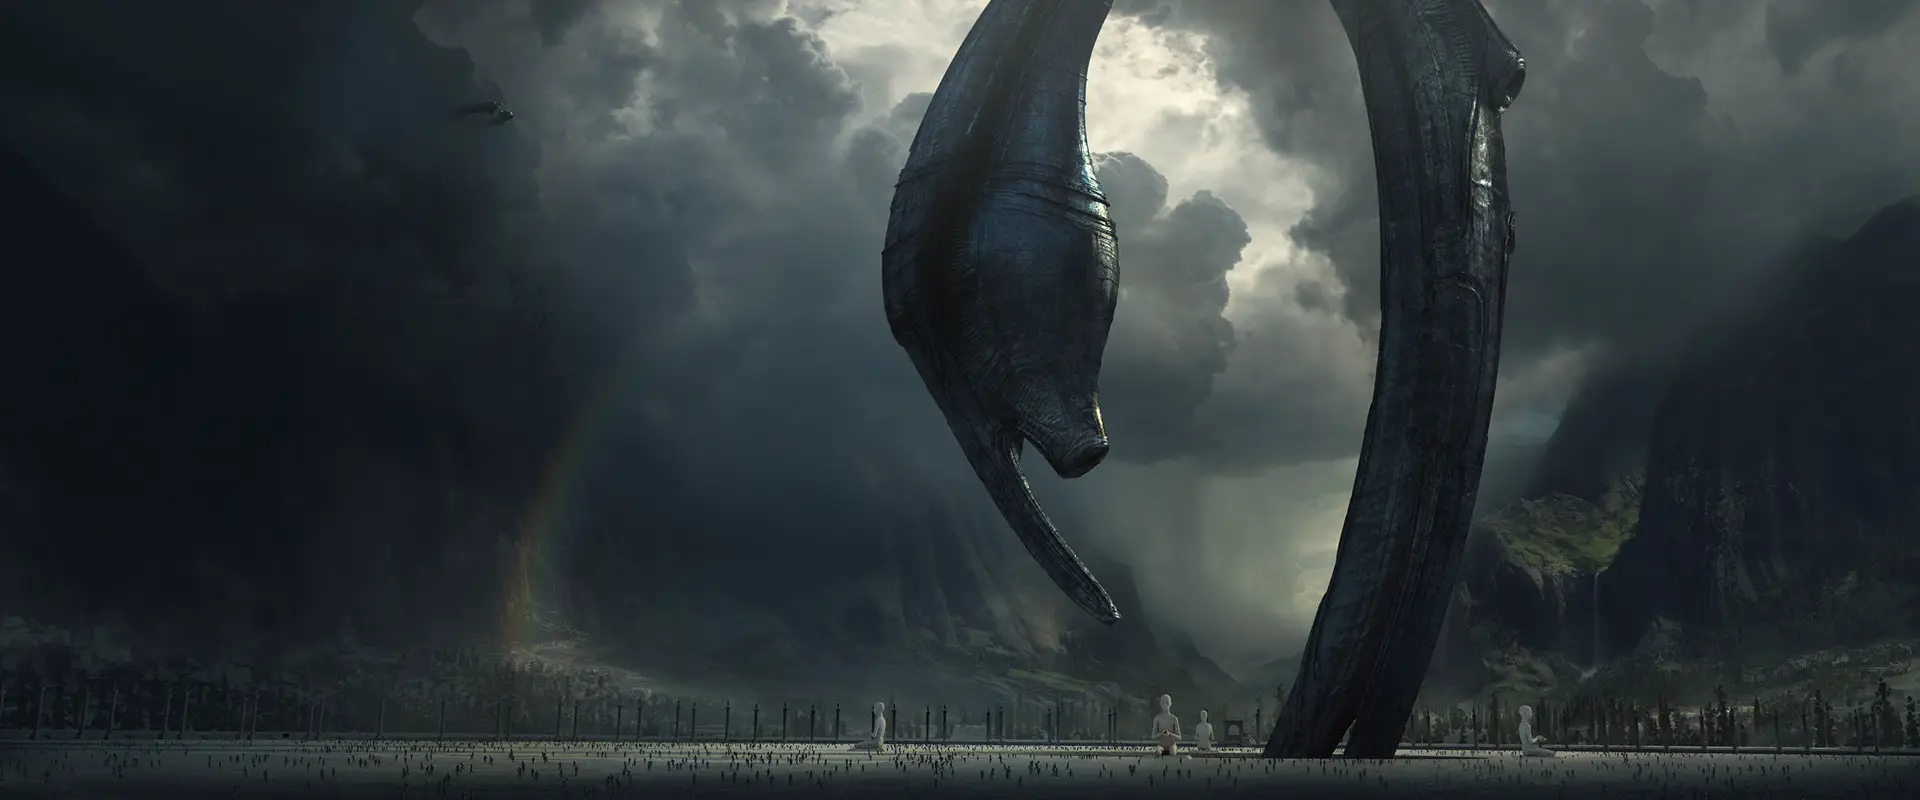 Docking Sequence Alien Covenant Forum